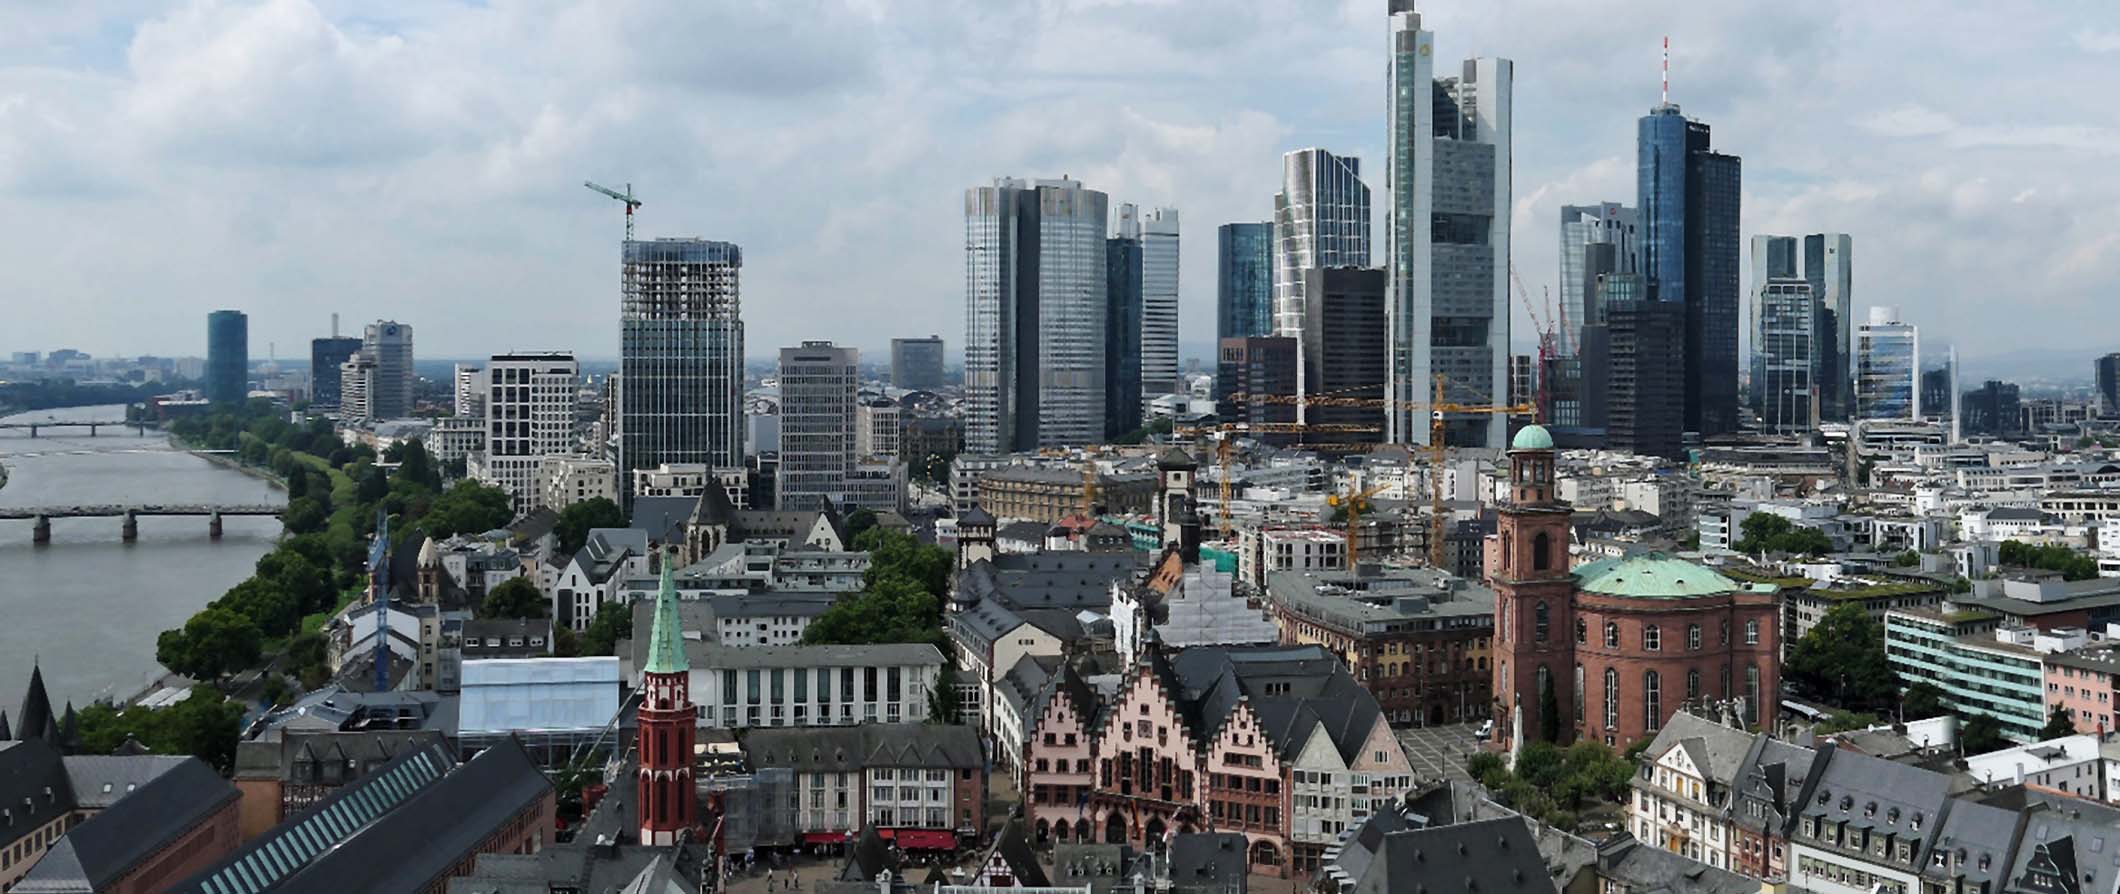 City view of Frankfurt taken from above